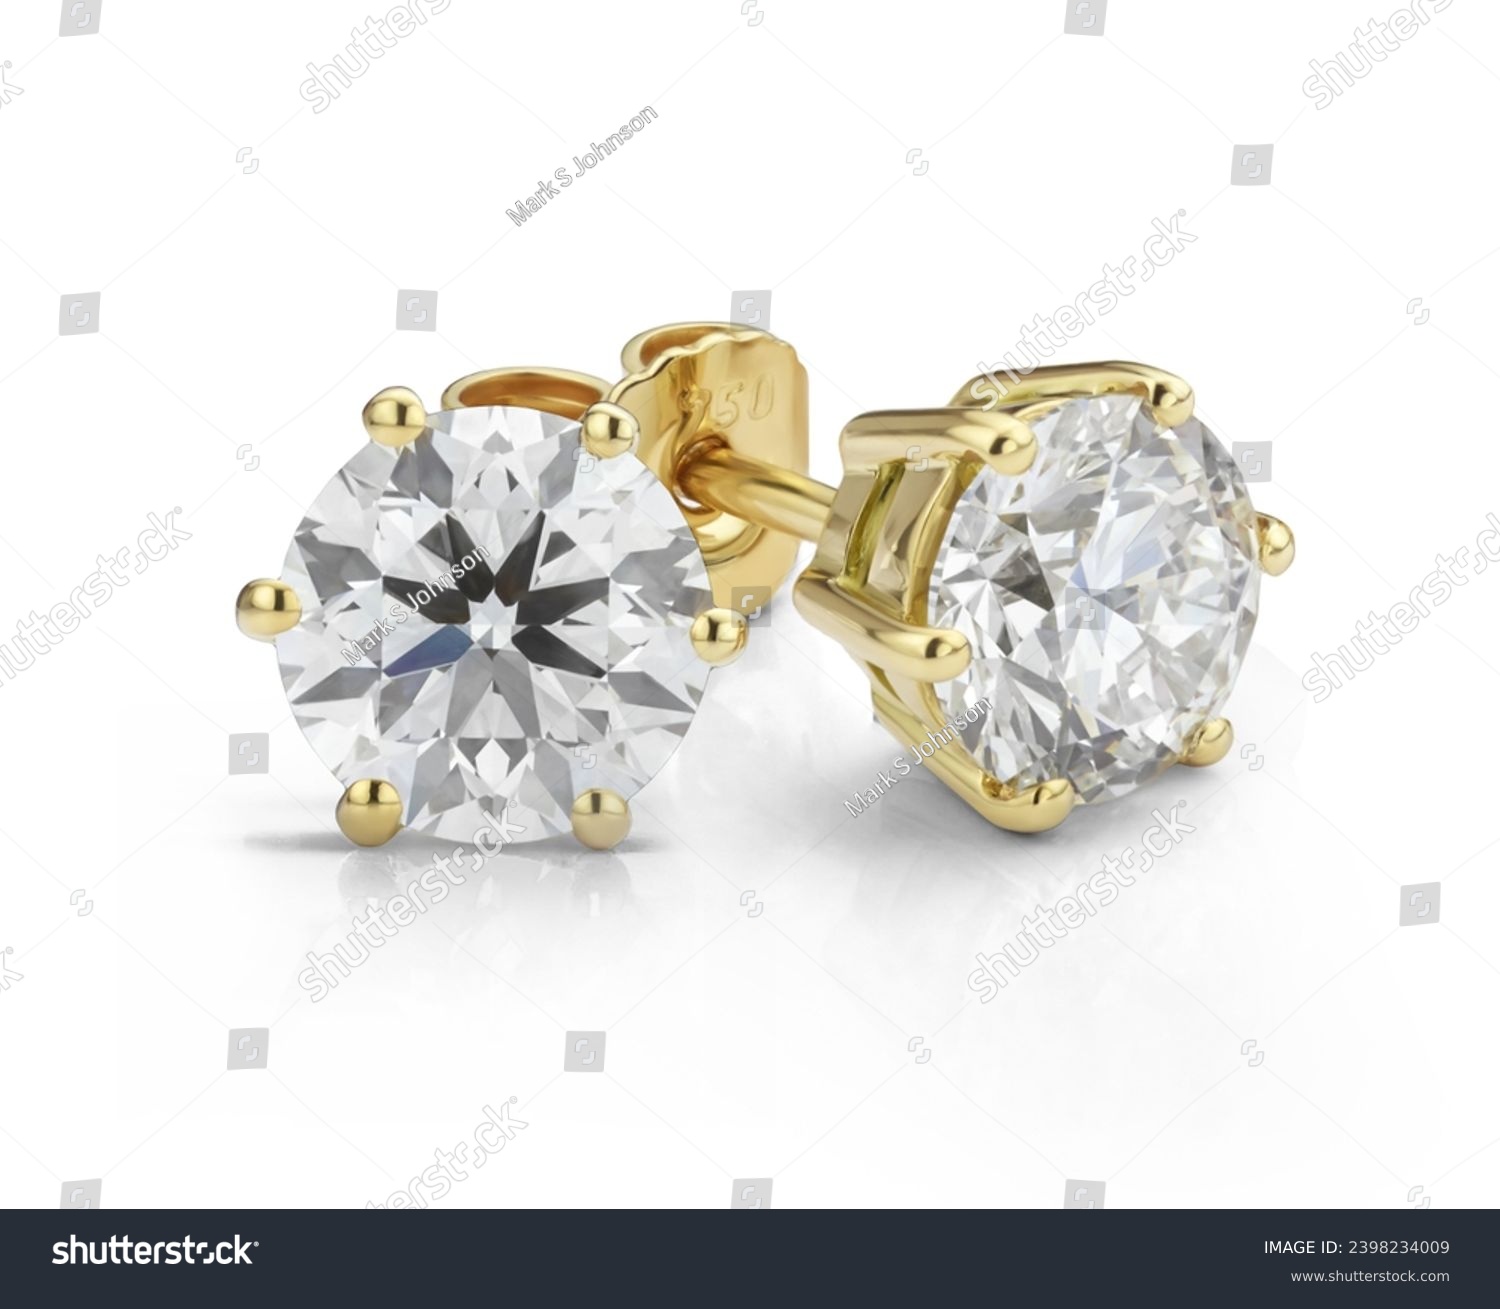 Yellow Gold Diamond Stud Earrings. Front and Side View of Solitaire Diamond Earrings Isolated on a White Background.  #2398234009